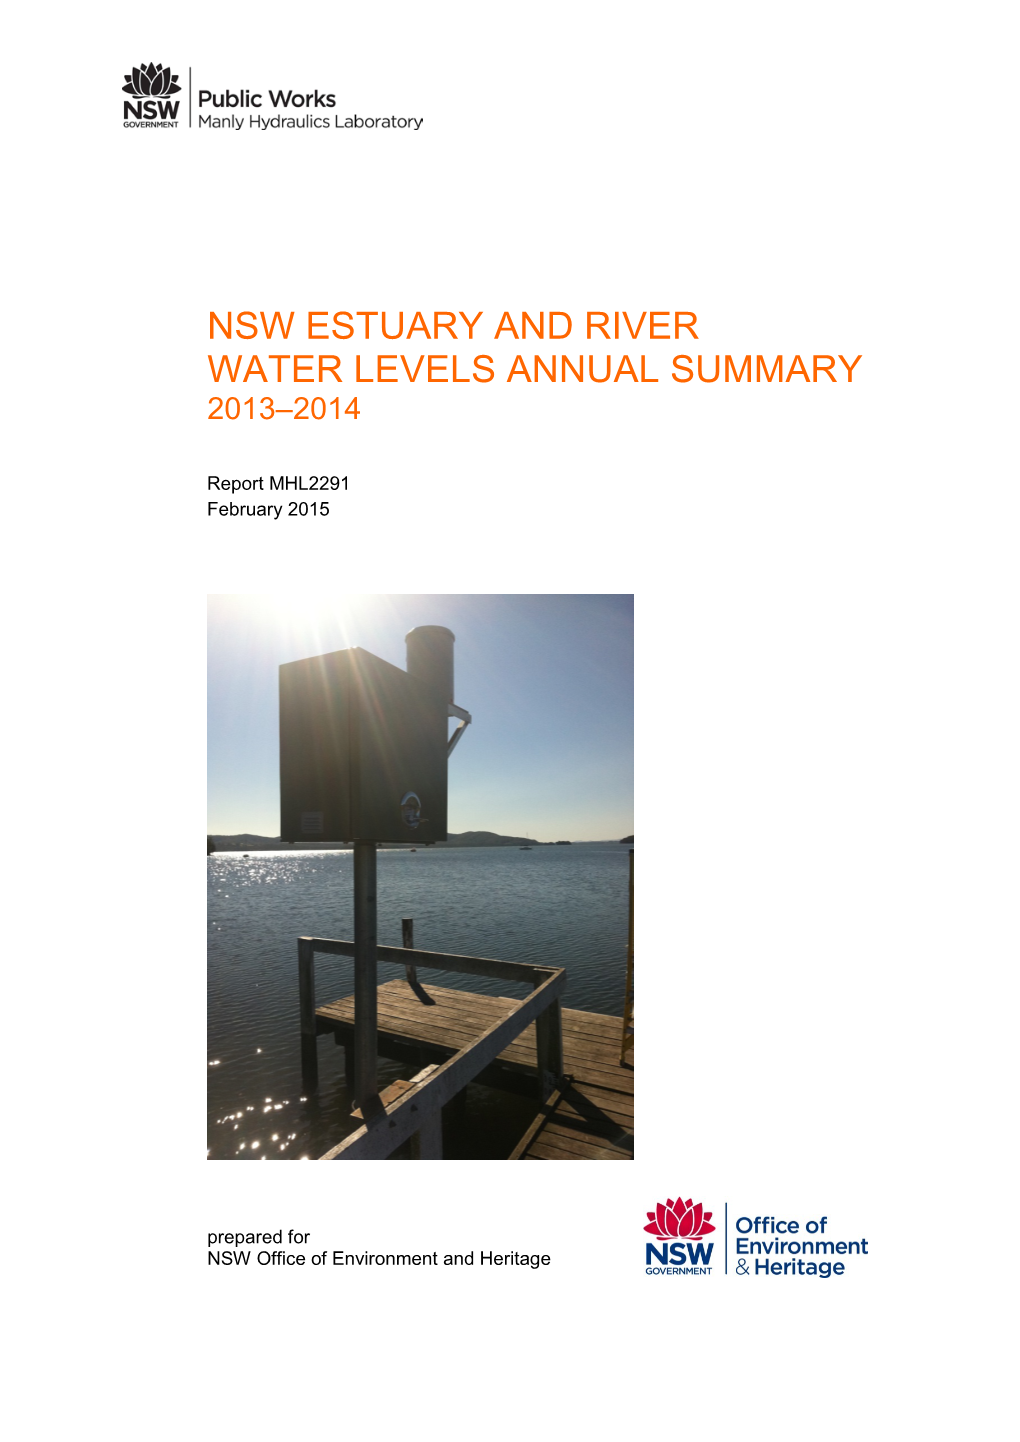 Nsw Estuary and River Water Levels Annual Summary 2013-2014